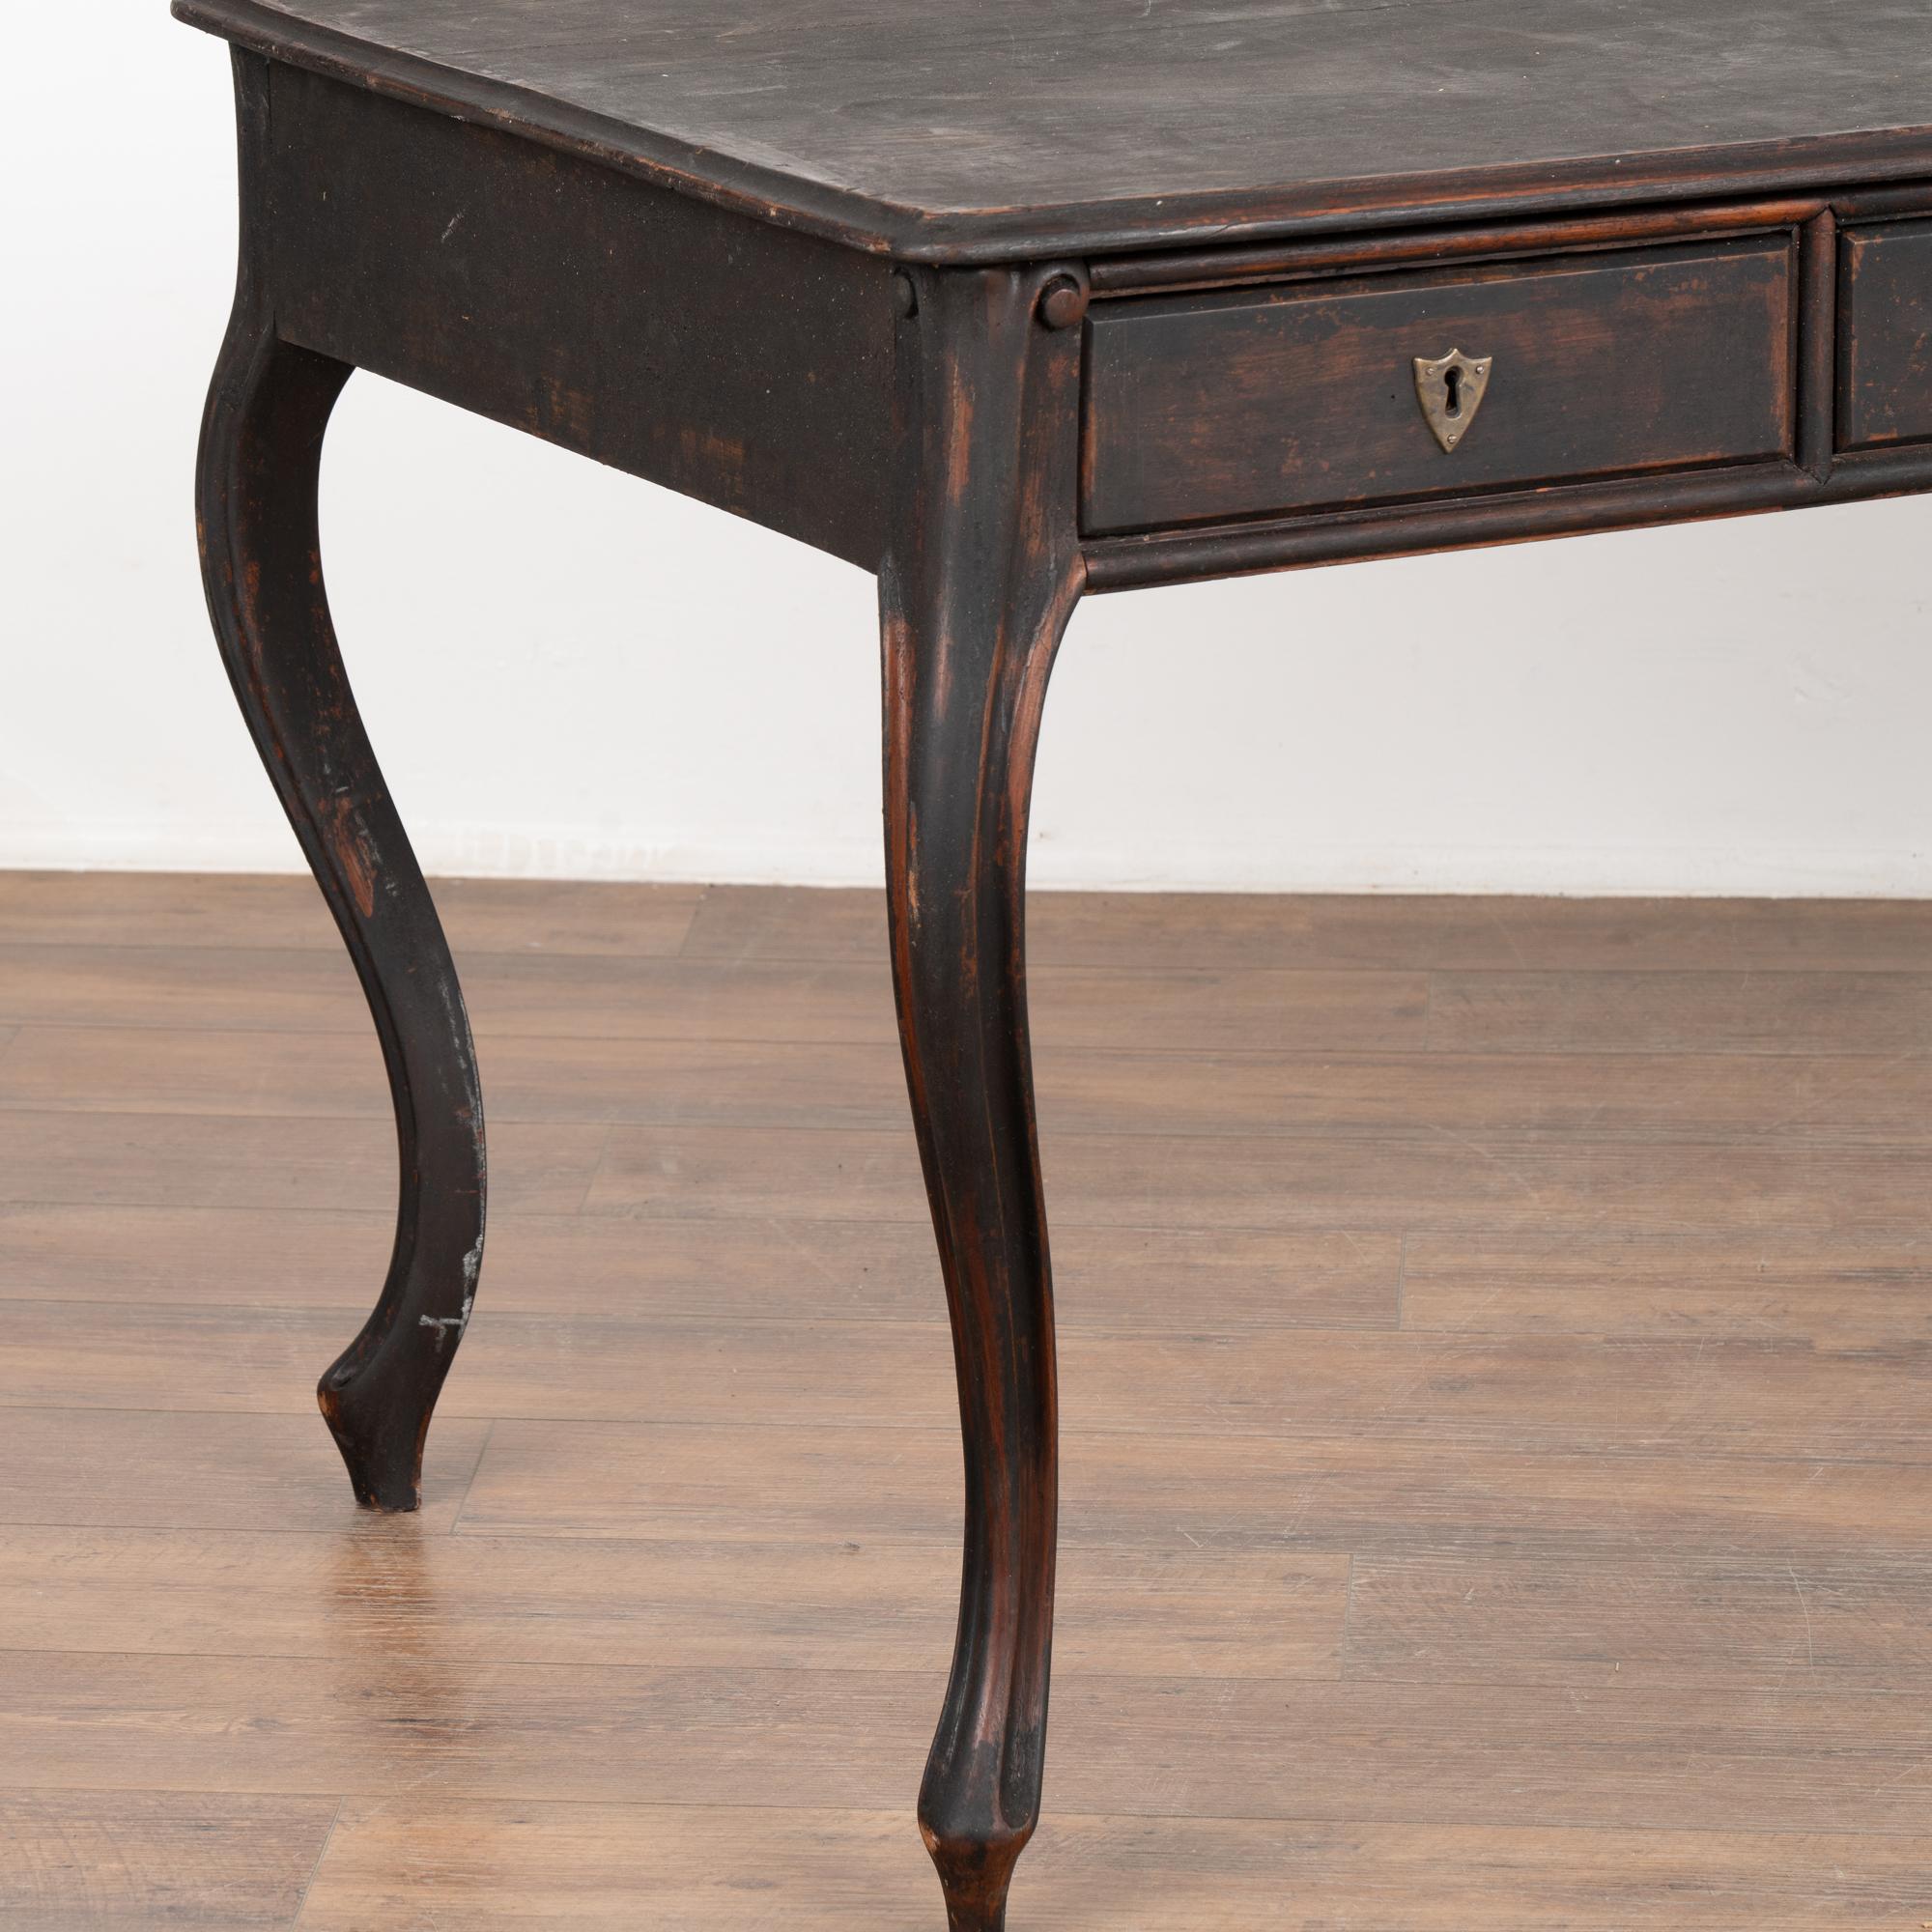 20th Century Black Writing Table Desk With Three Drawers, Sweden circa 1900